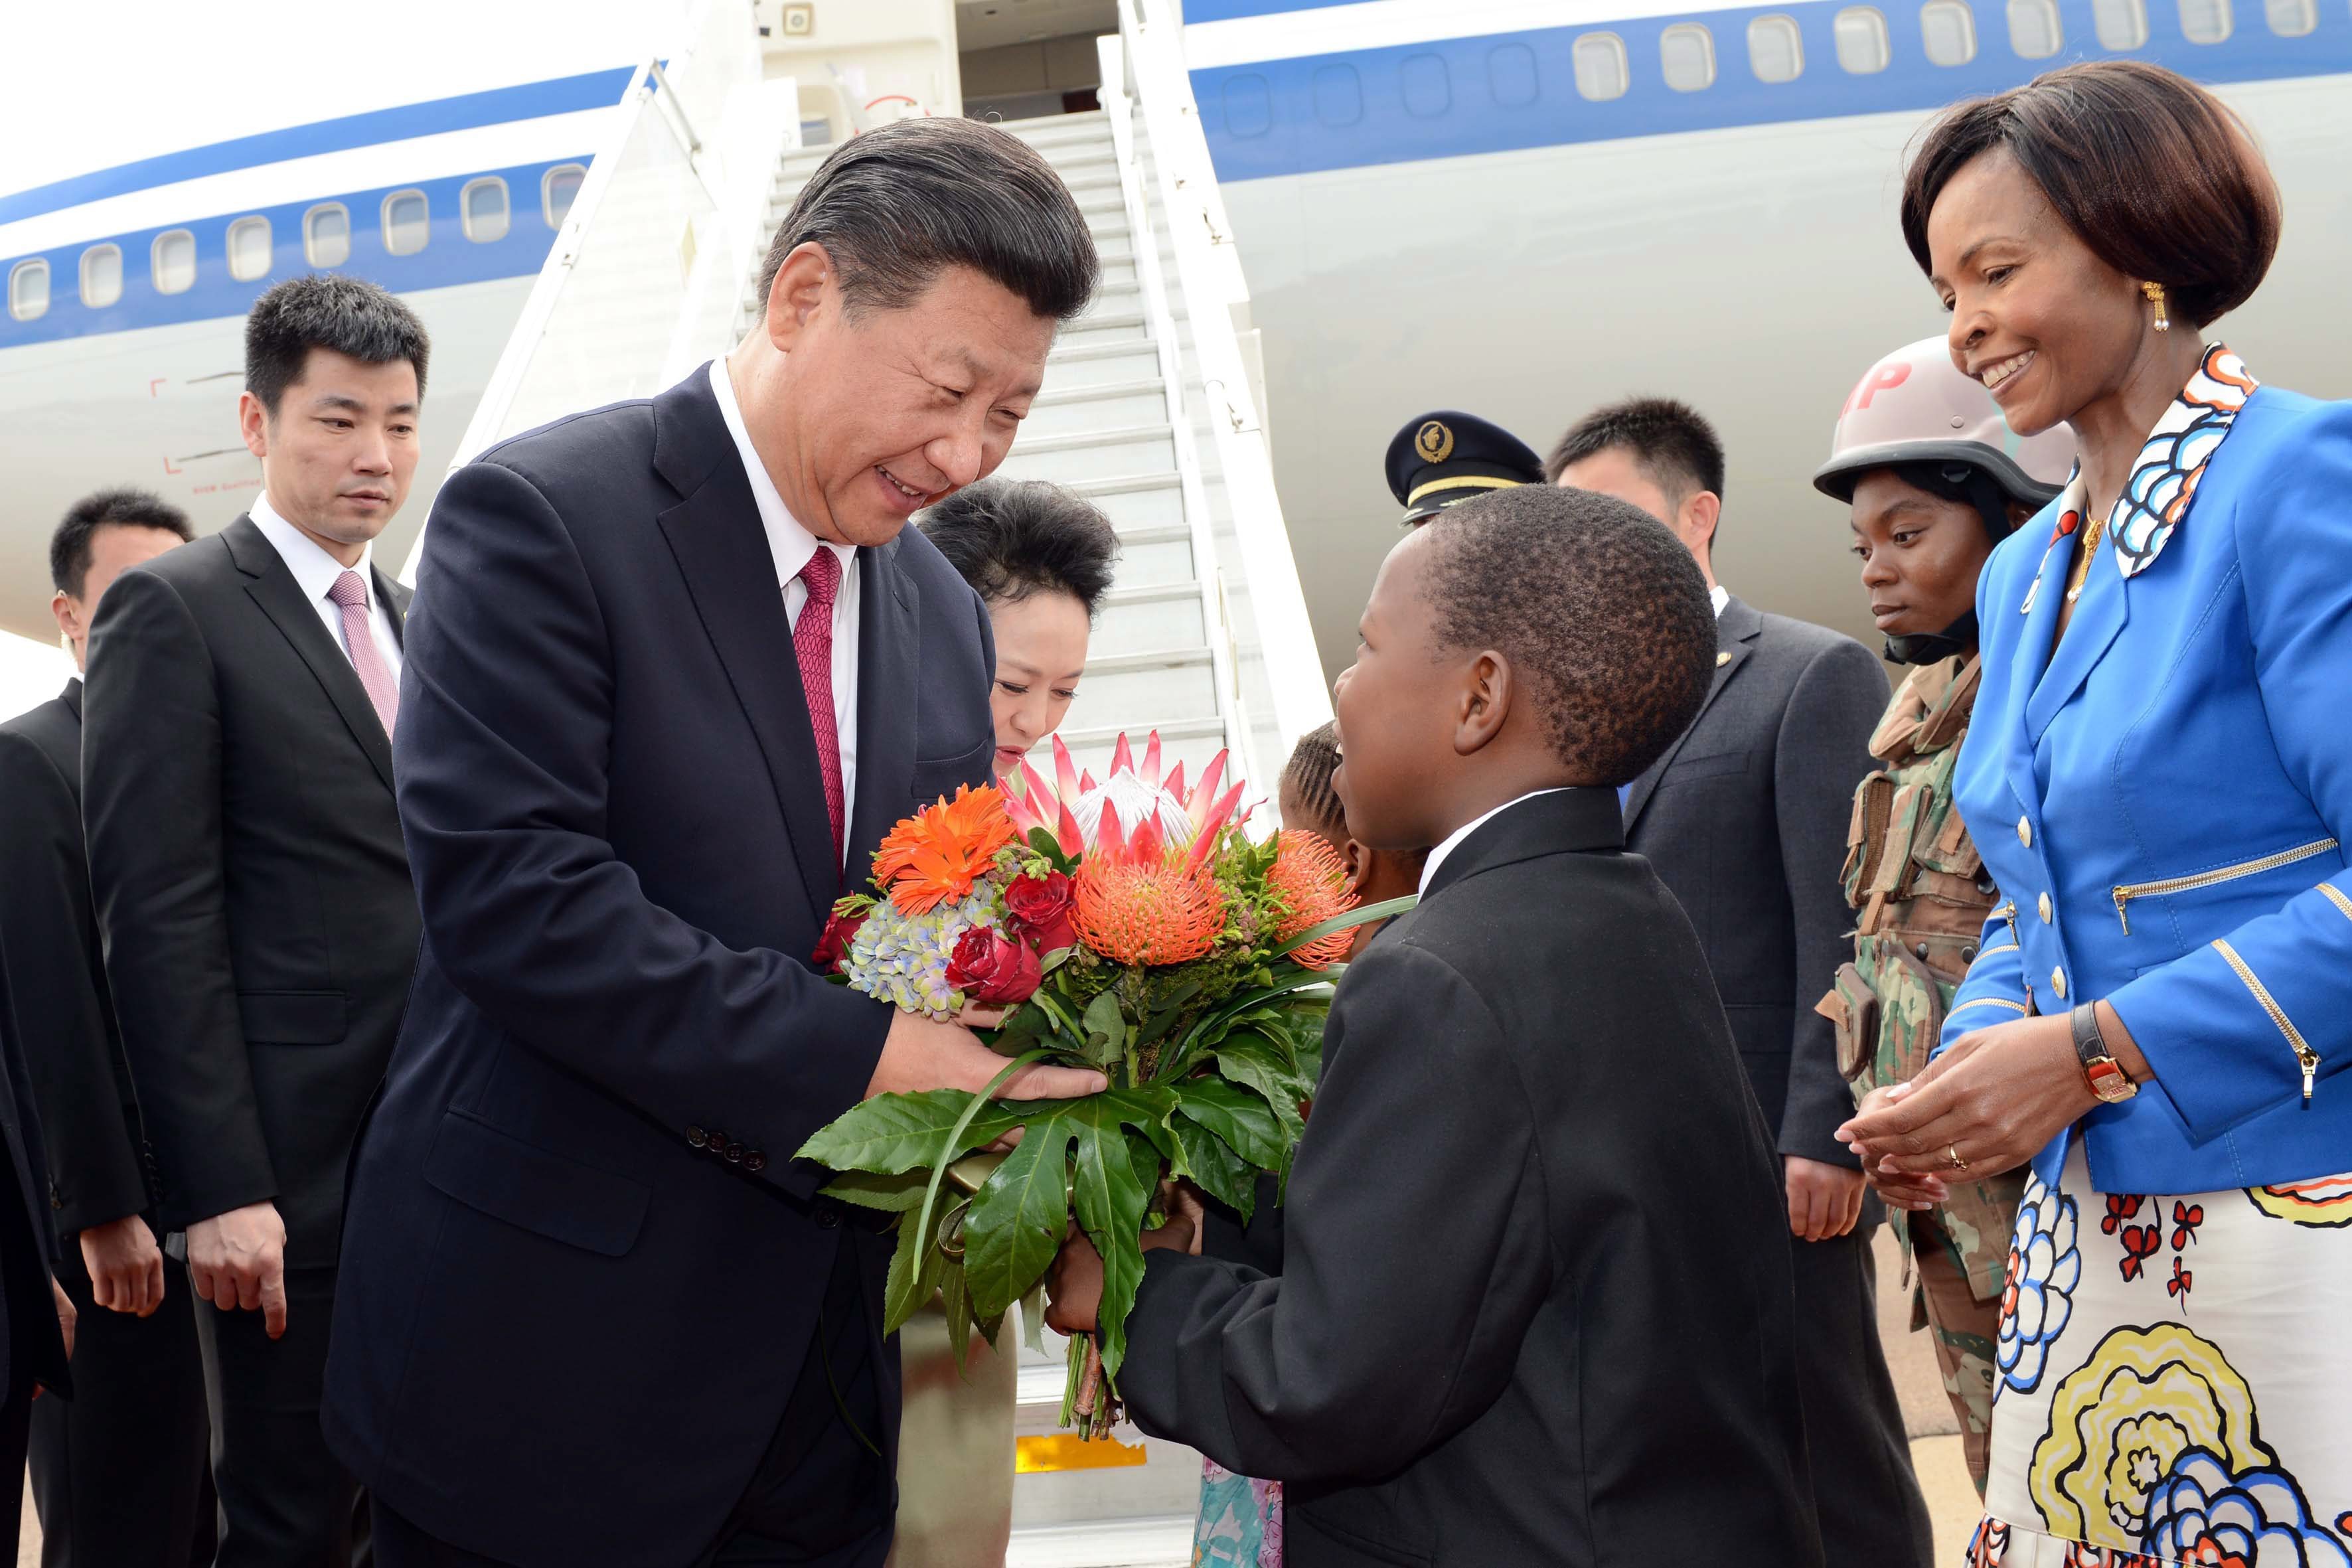 Chinese President Xi Jinping is greeted upon his arrival at Waterkloof Air Force Base in Pretoria, South Africa, in December 2015. Photo: EPA